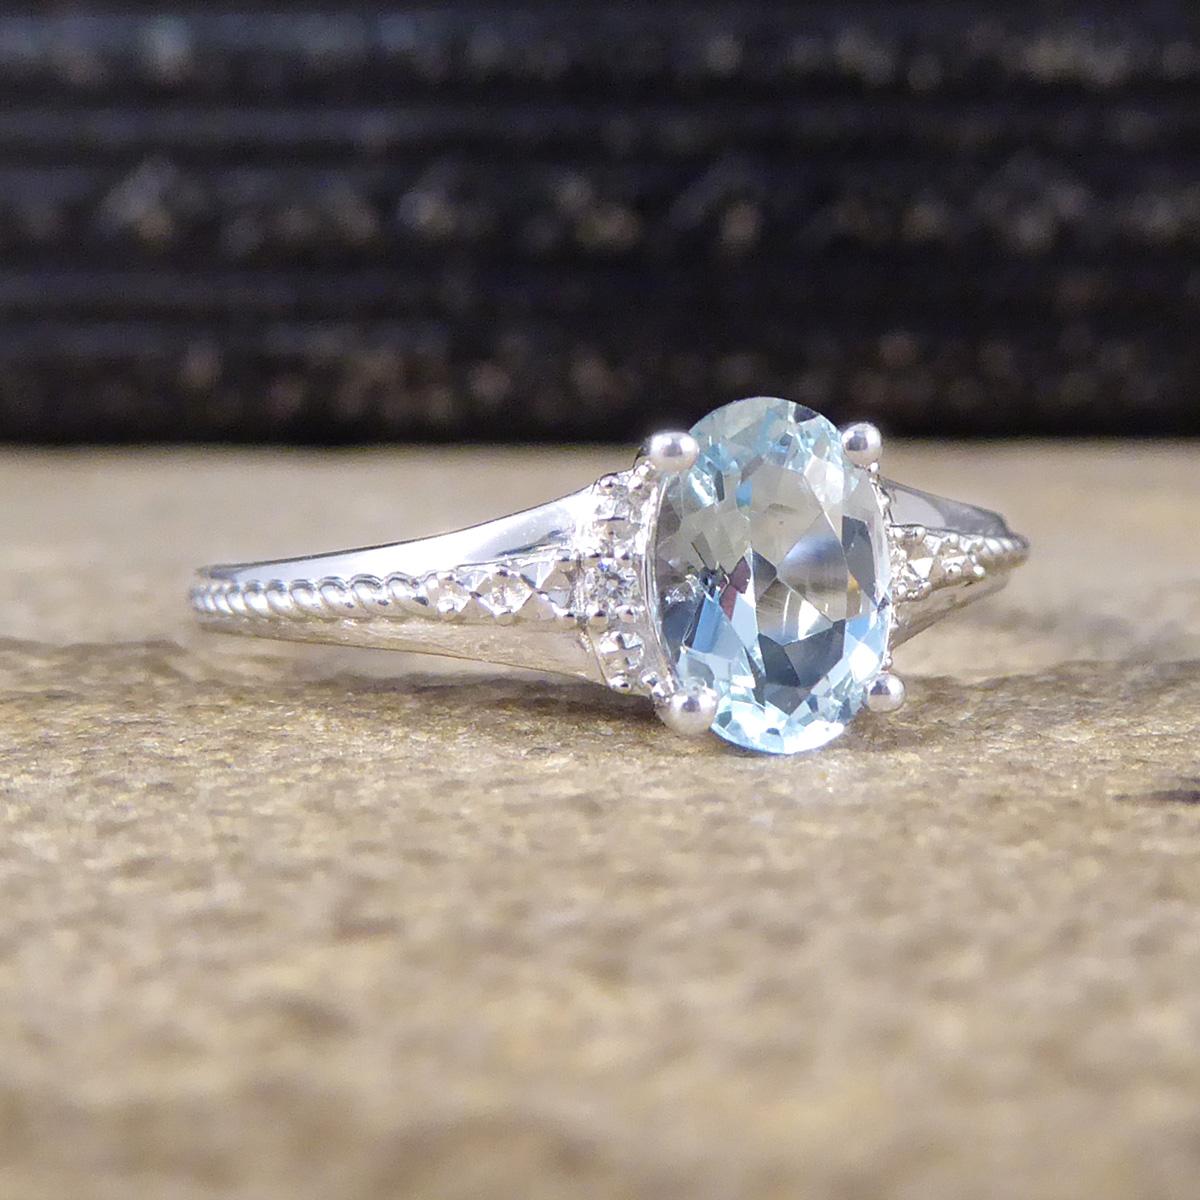 Featuring in this new ring is a light blue single Aquamarine in a four claw setting. There is one small Diamond set into the shoulders of this ring on either side of the Aquamarine. The Diamond are set into a grained illusion setting giving the